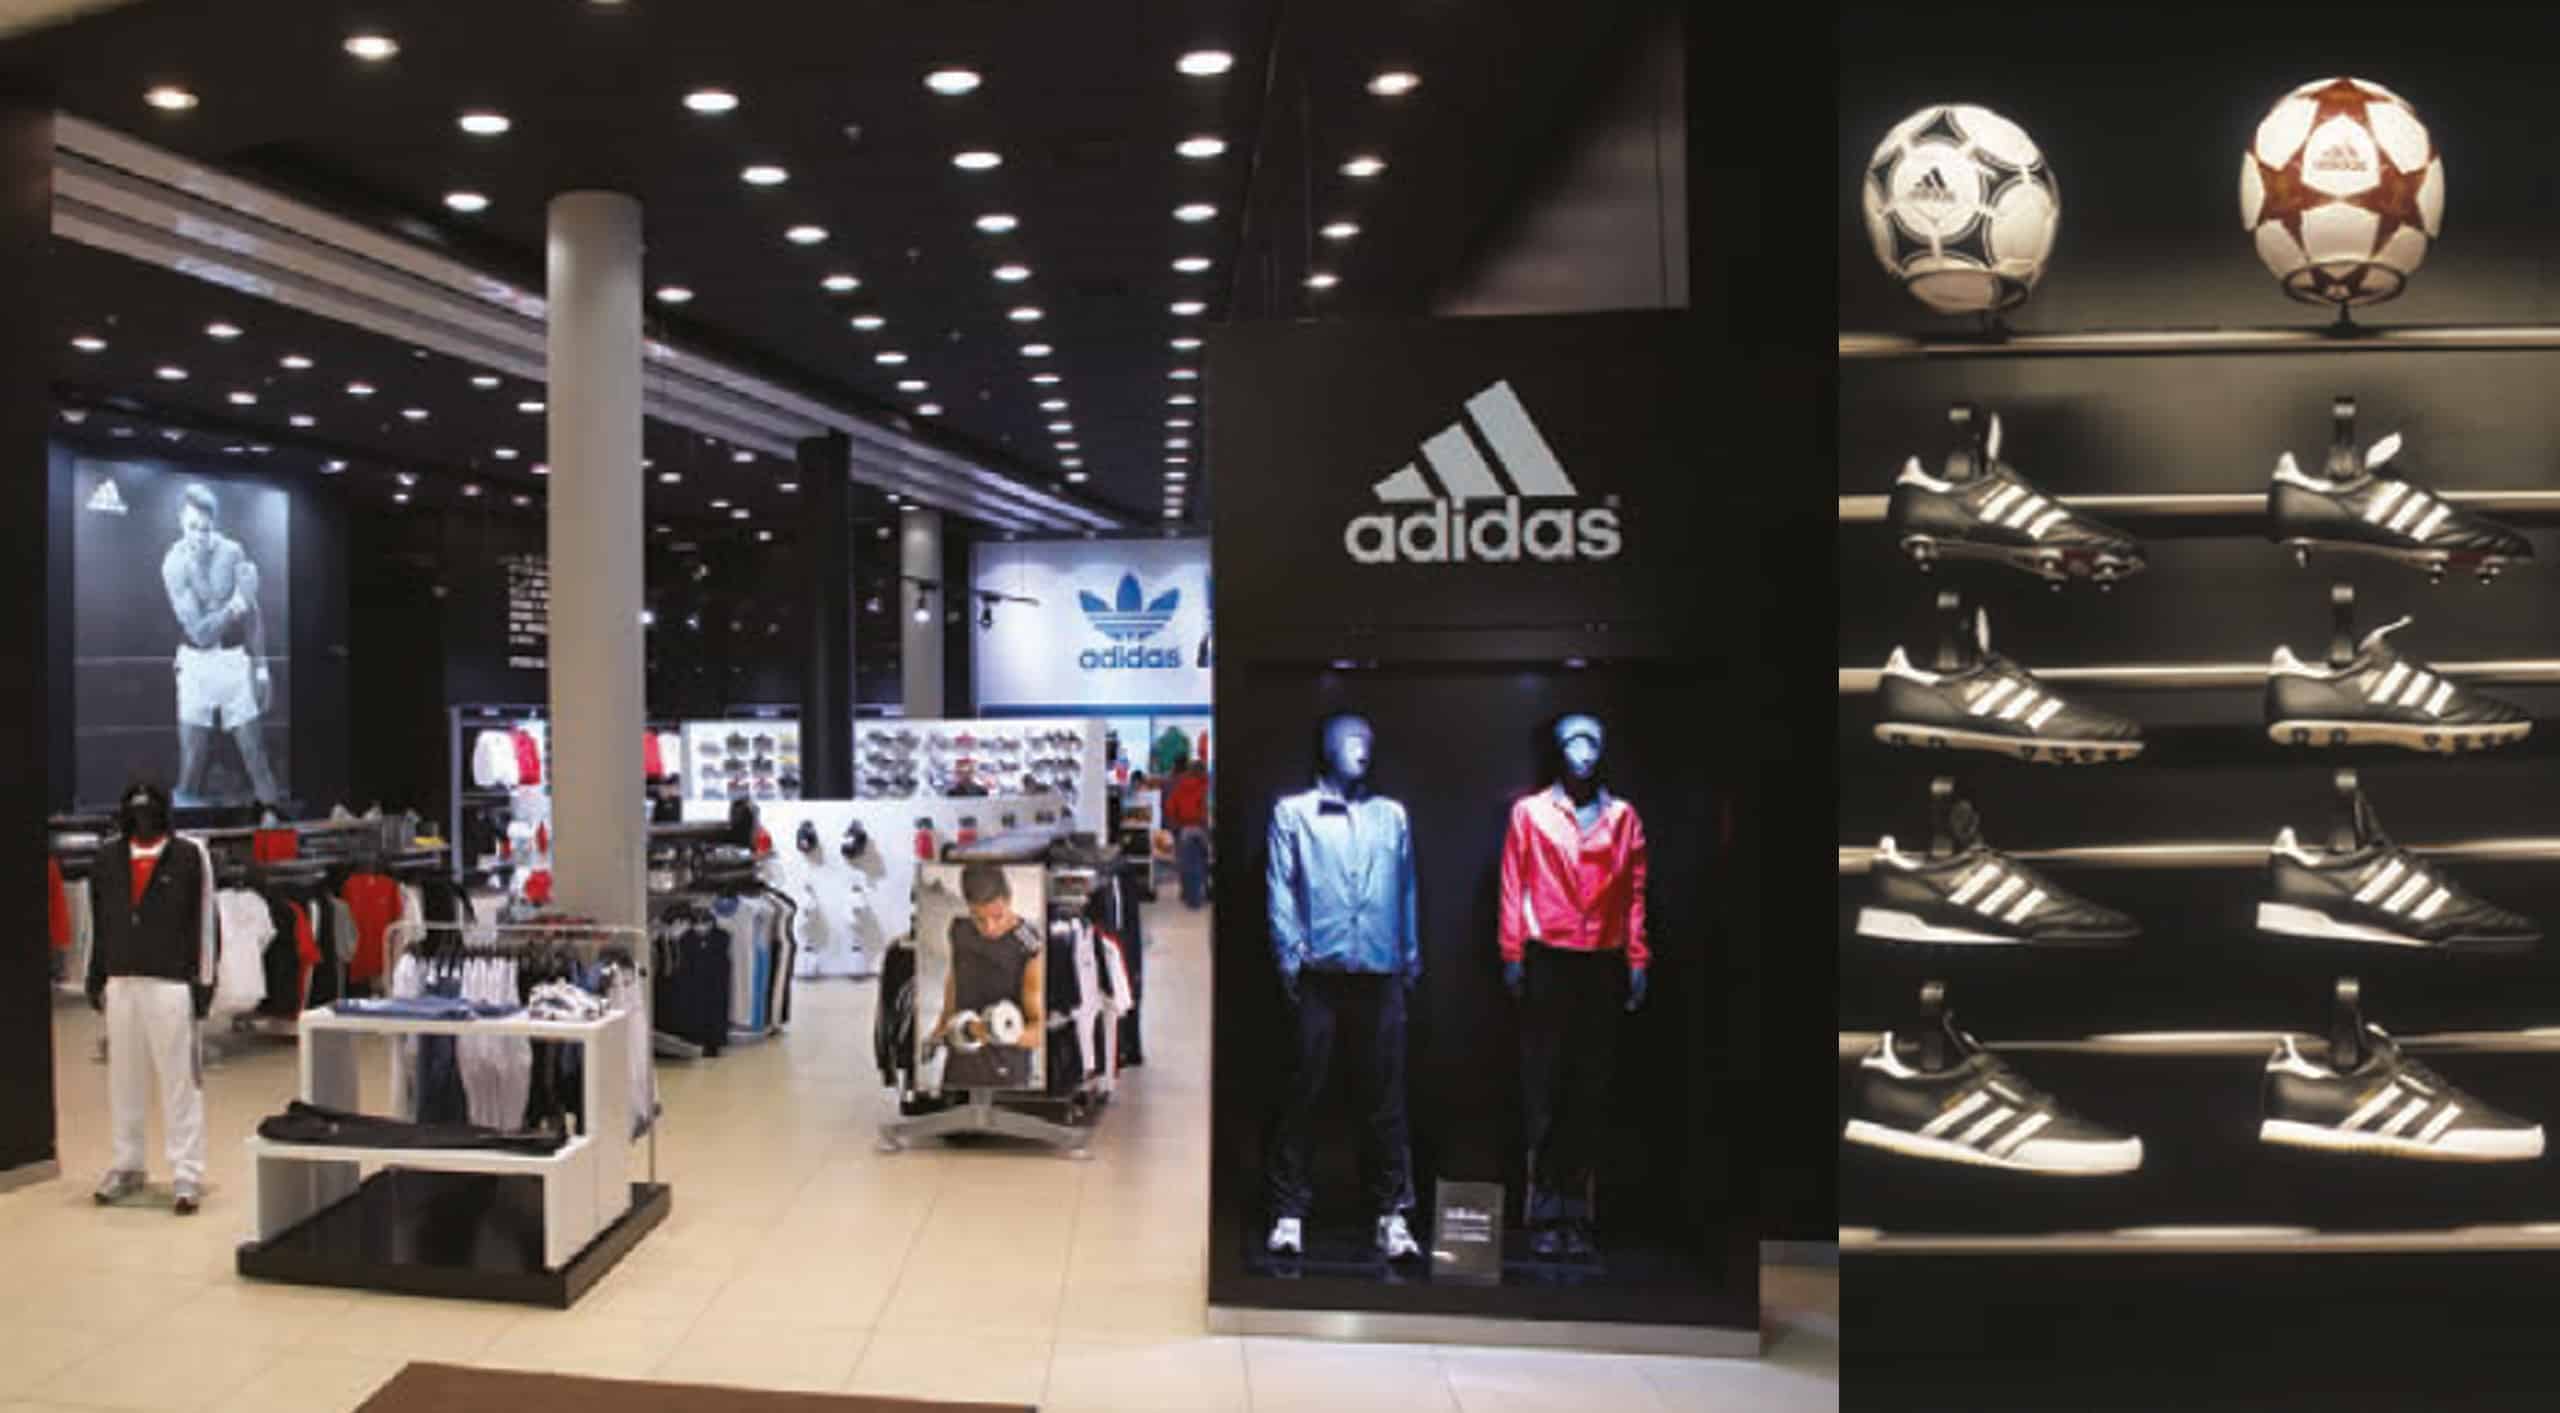 Images of Adidas Sports Performance flagship concept store.